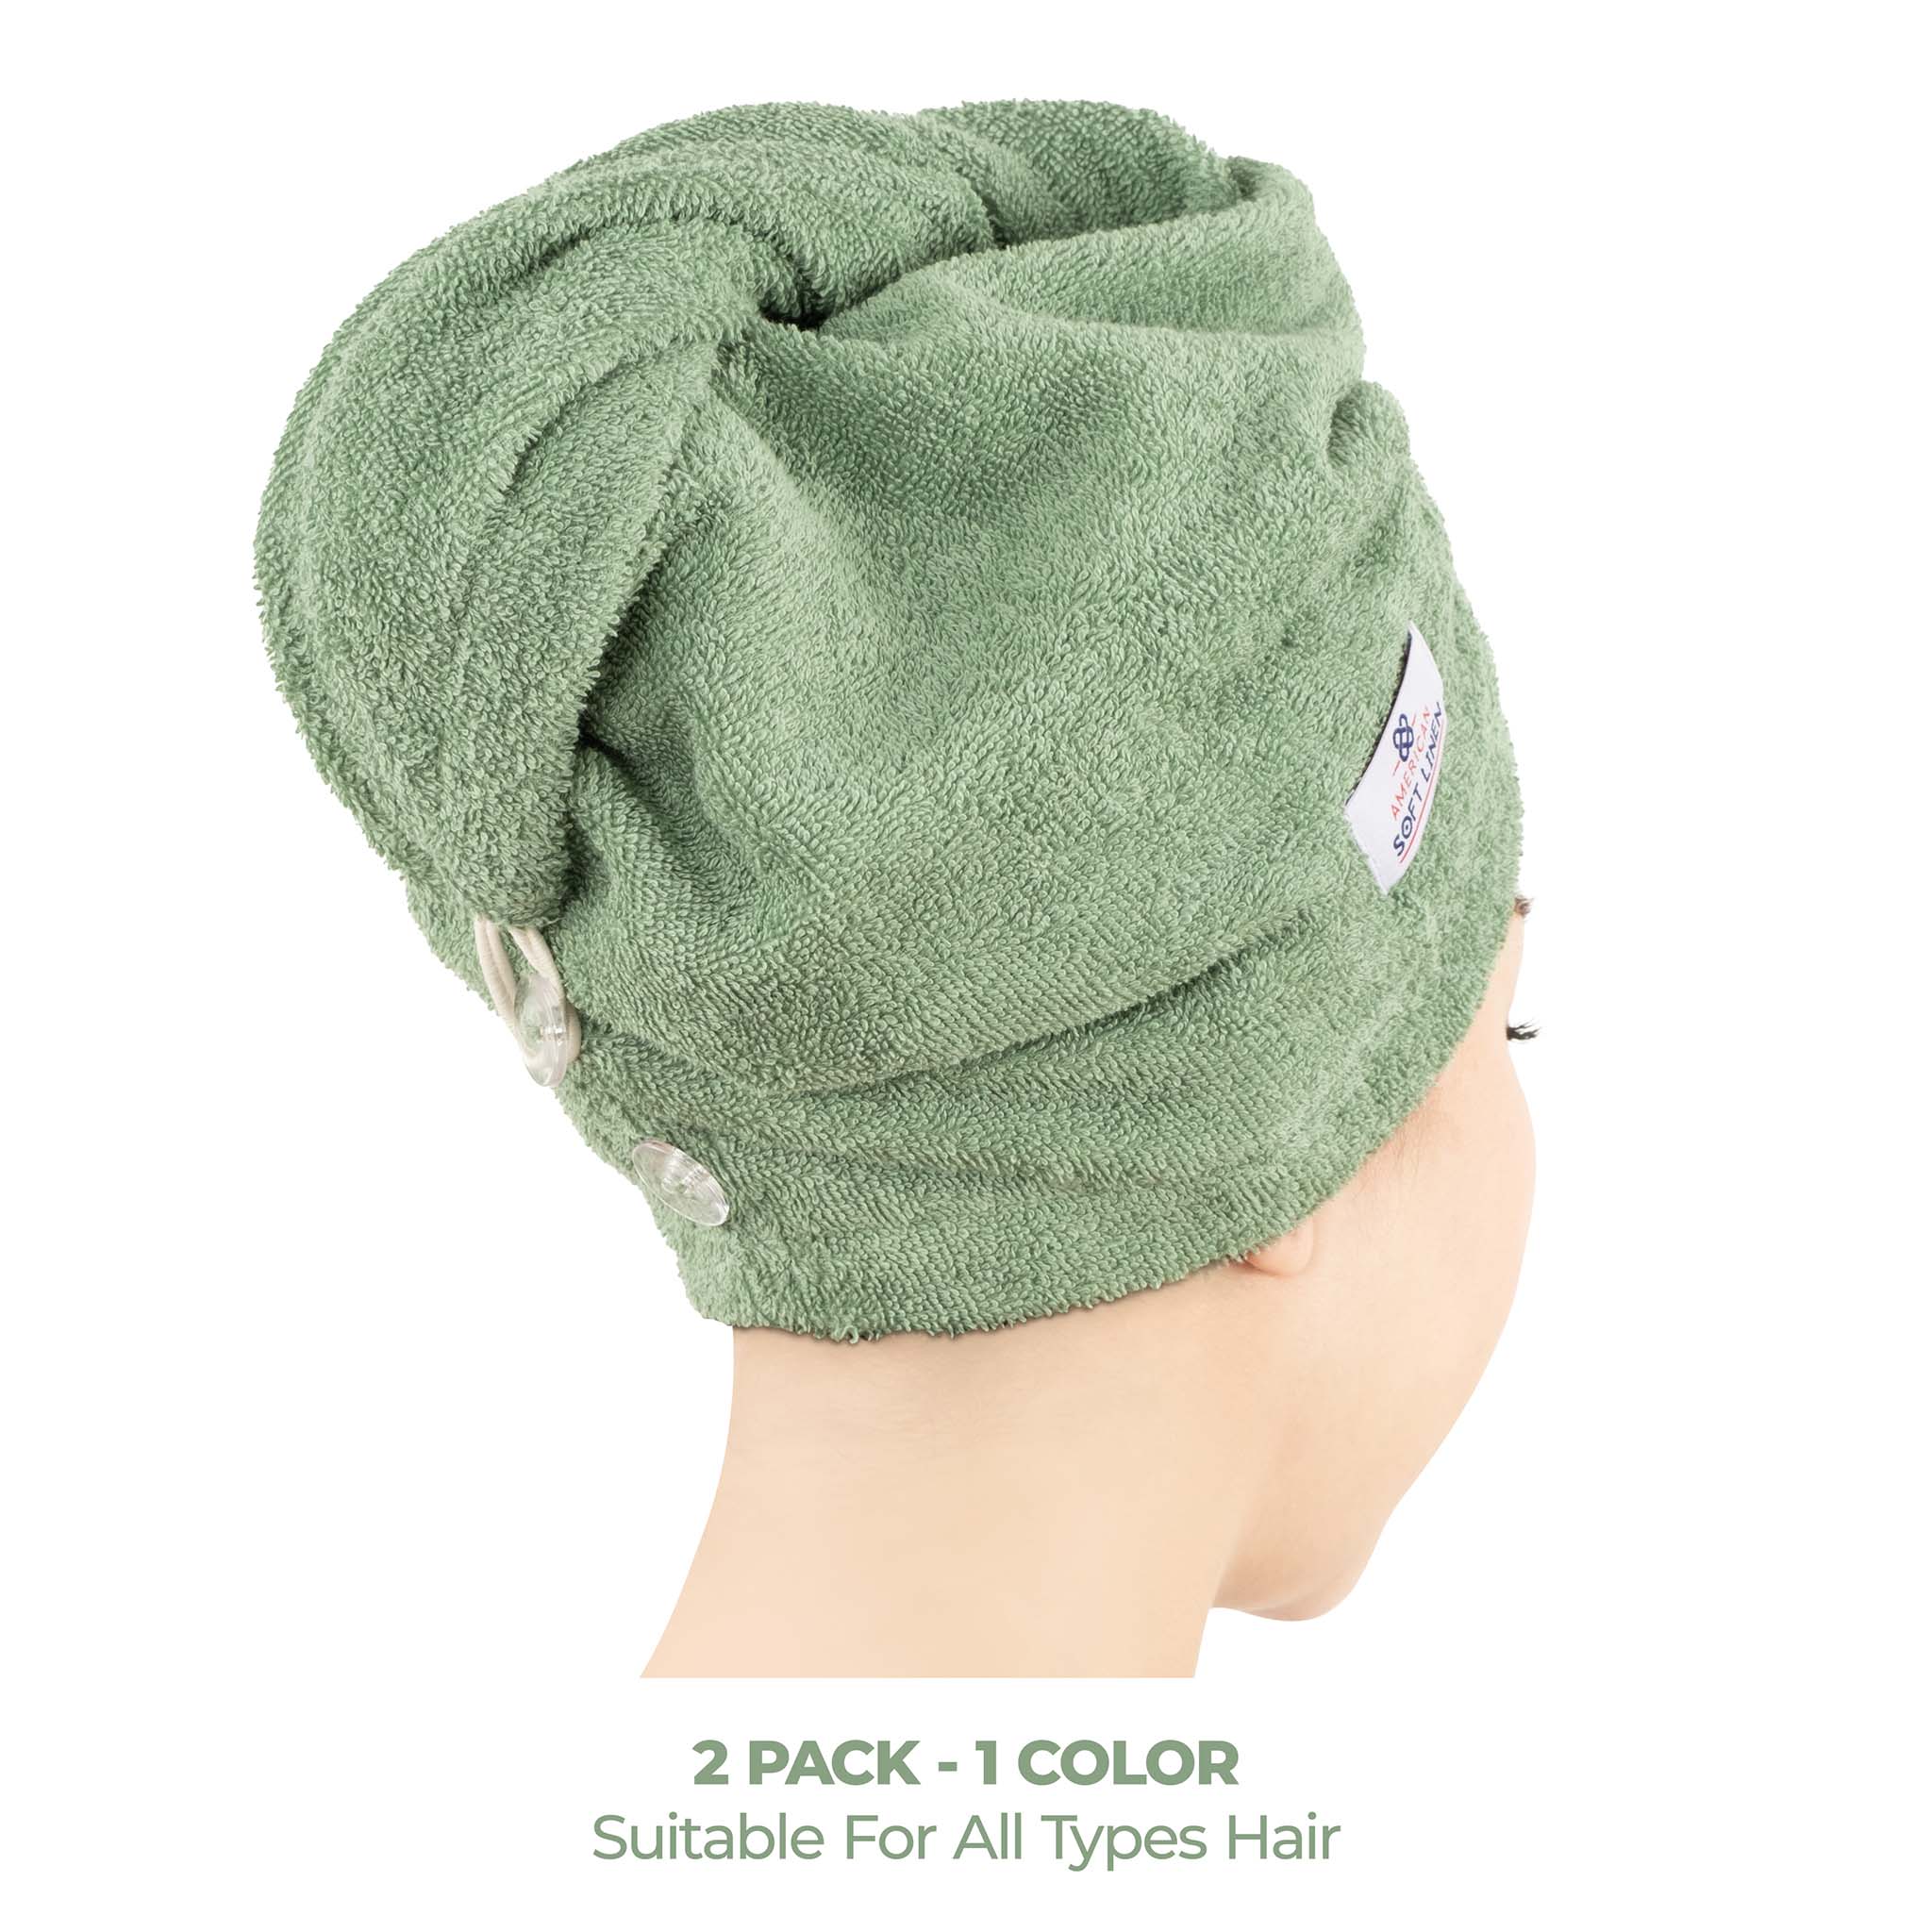 American Soft Linen 100% Cotton Hair Drying Towels for Women 2 pack 75 set case pack sage-green-3